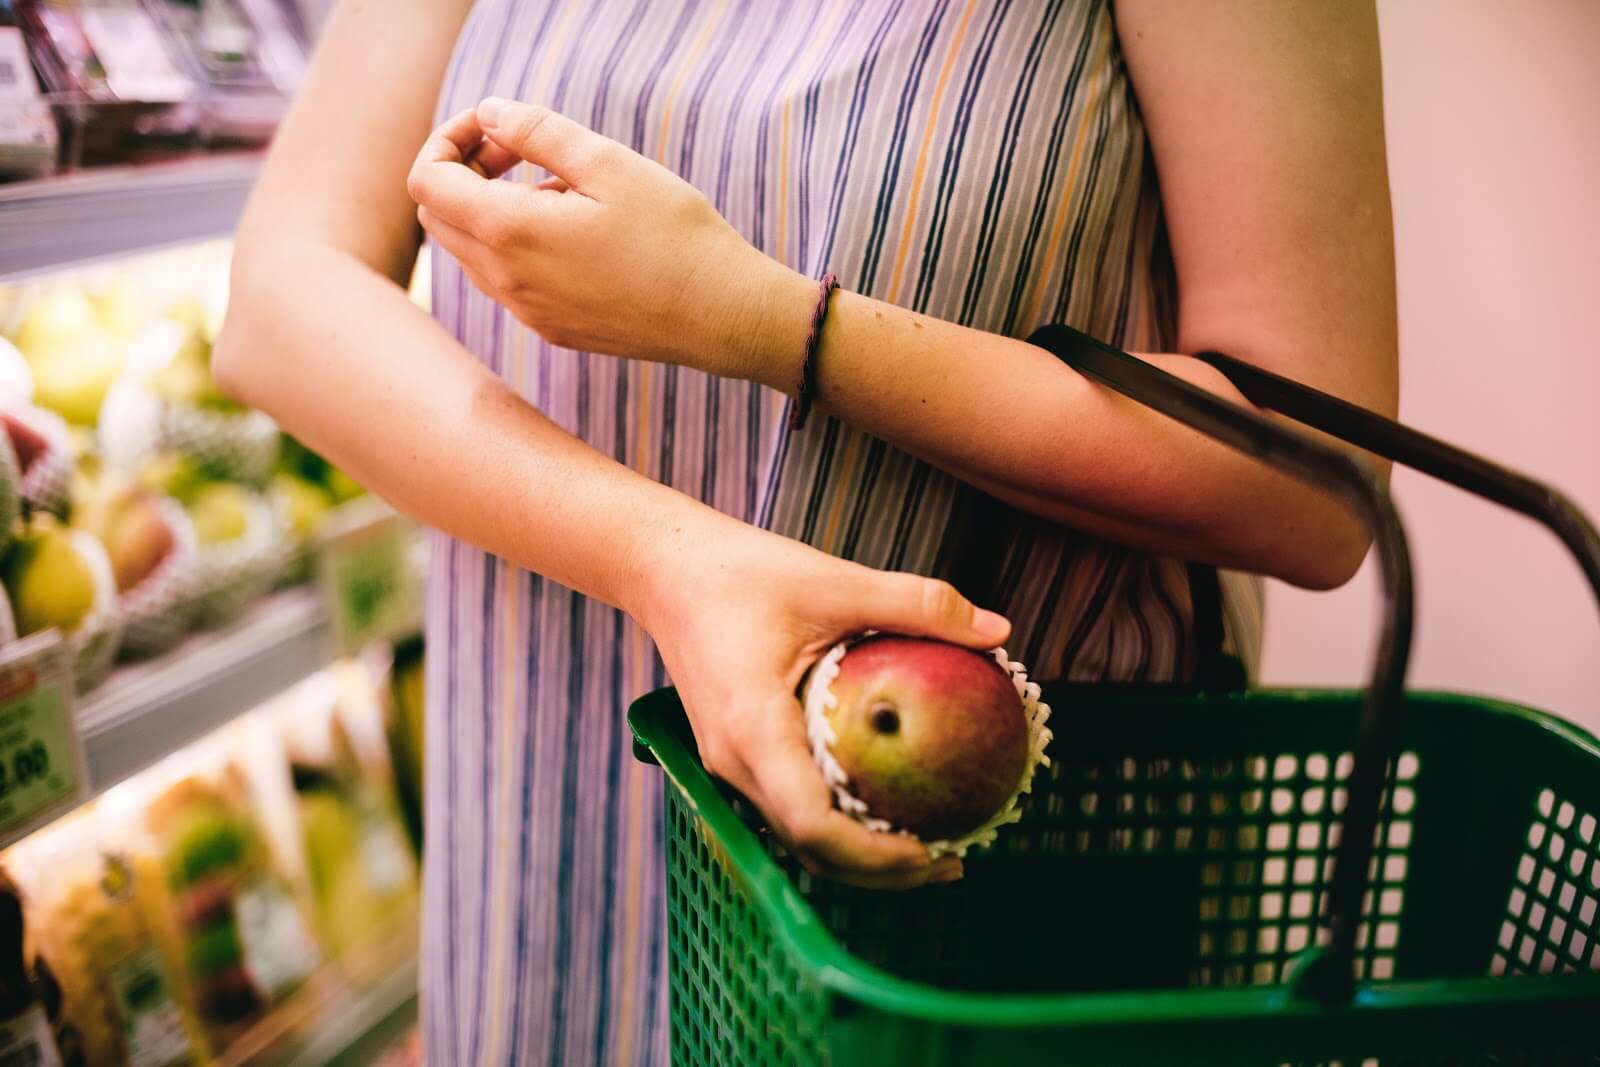 Woman using the Instacart shopper app to select produce